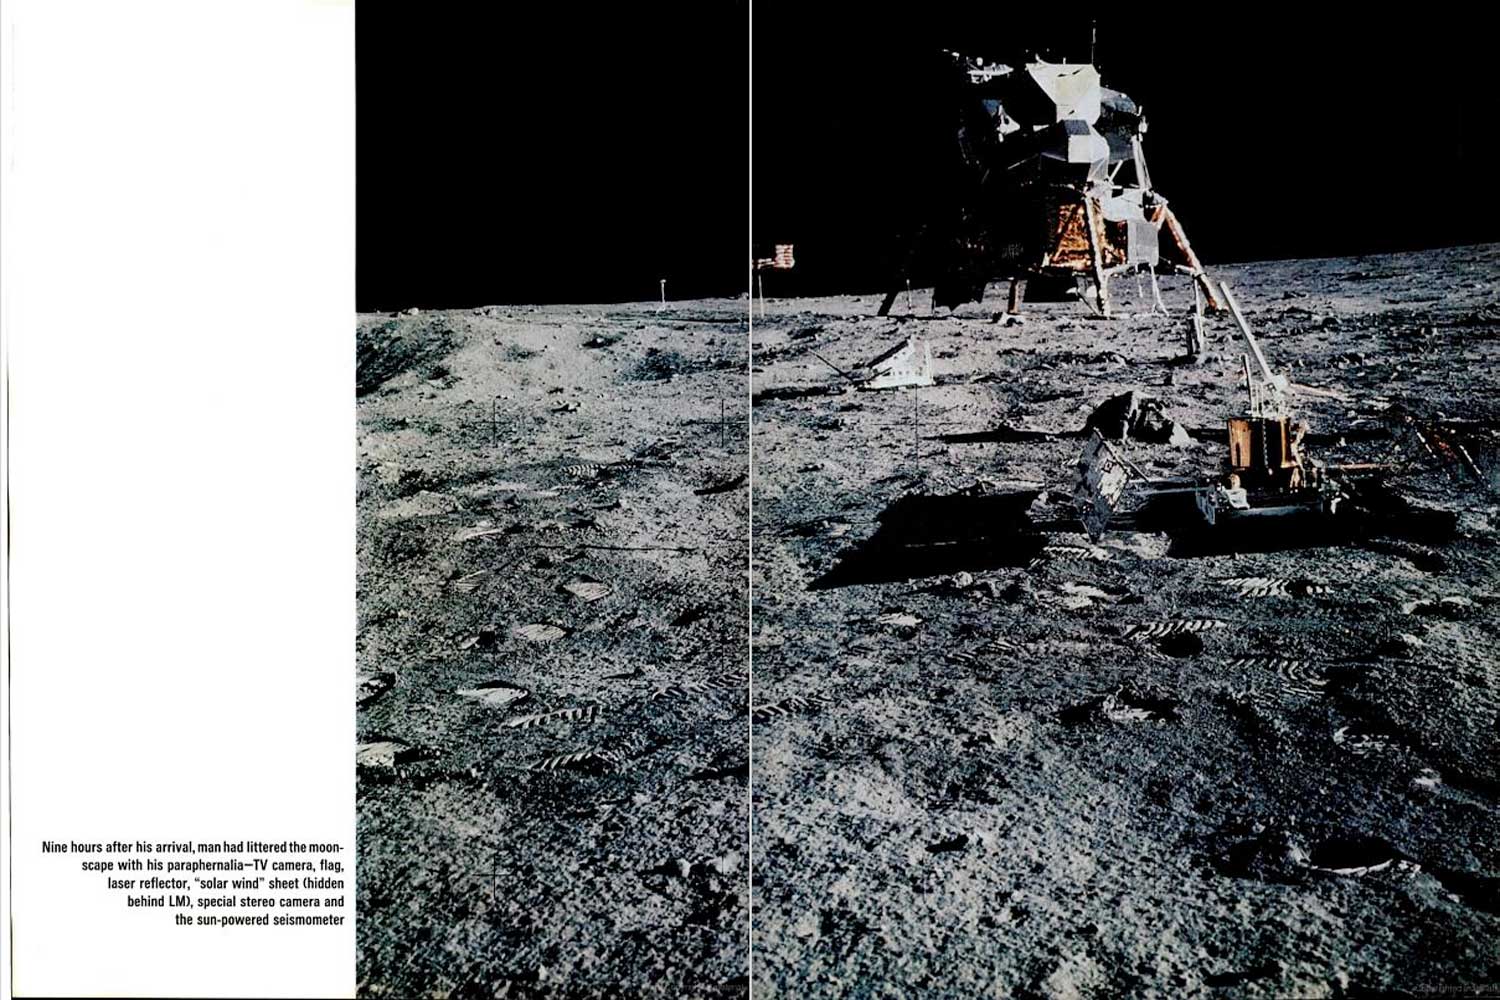 August 11, 1969, special edition of LIFE magazine.